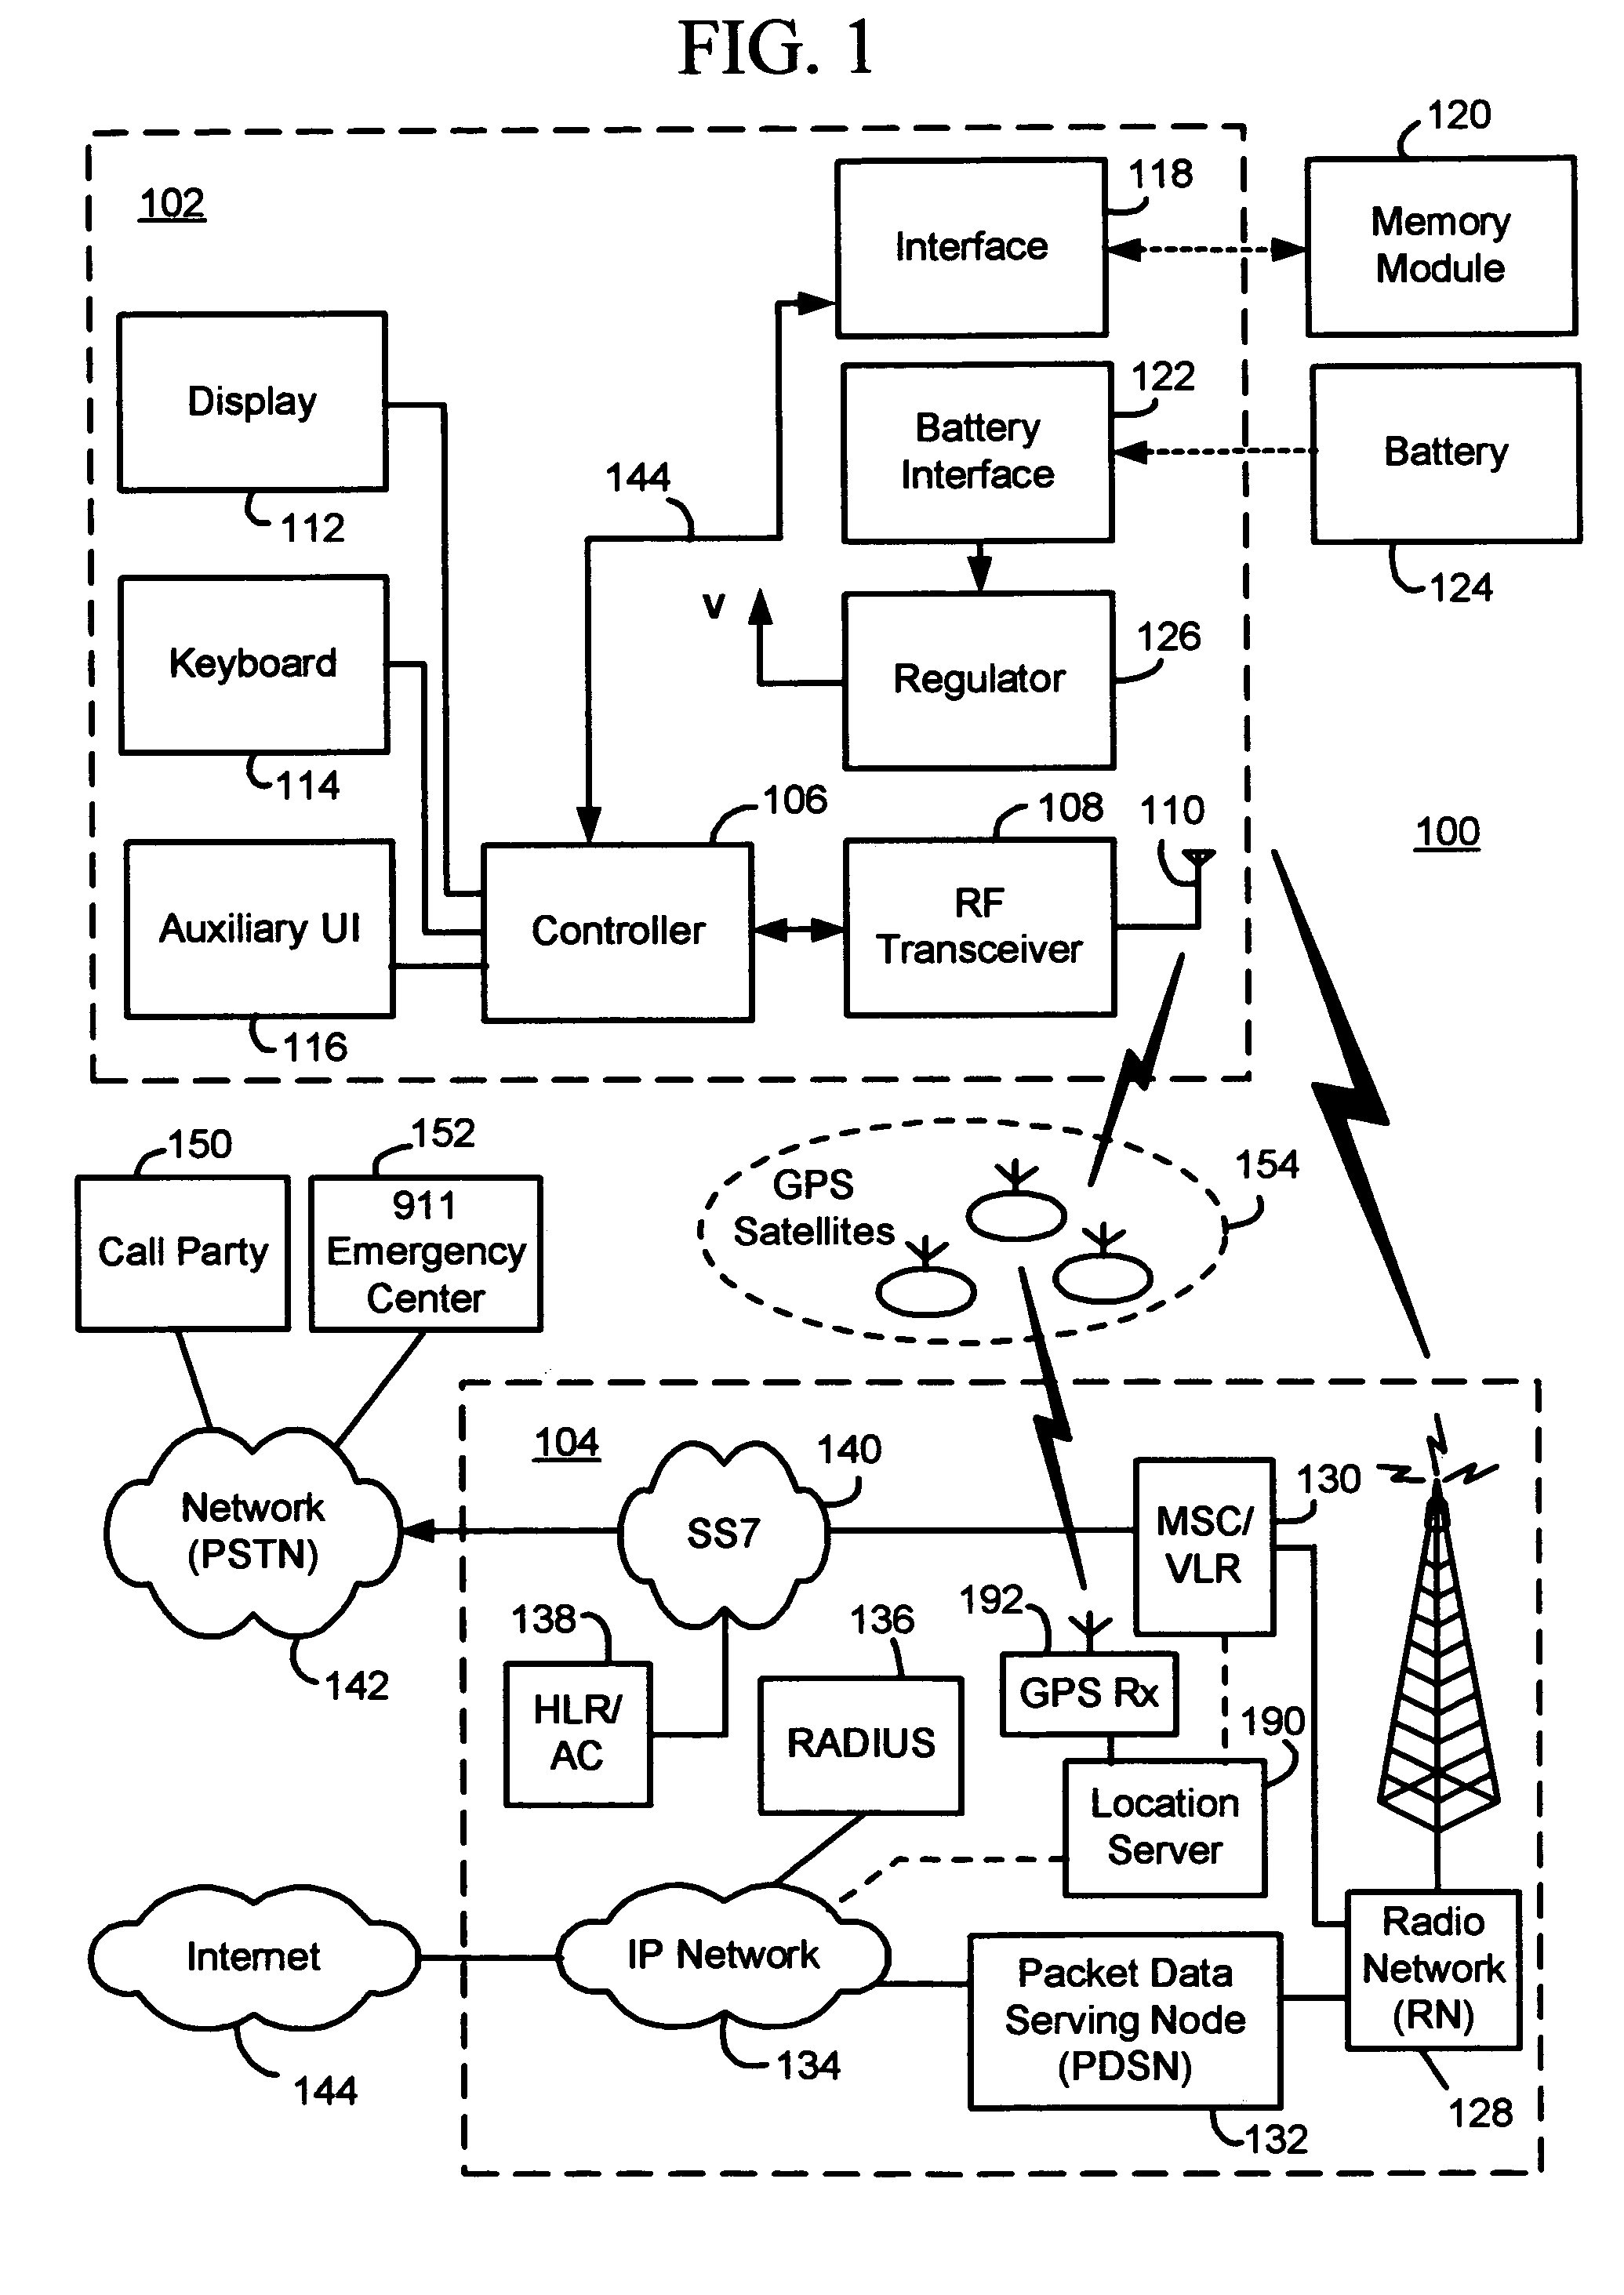 Methods and apparatus for facilitating the determination of GPS location information for a mobile station without disrupting communications of a voice call